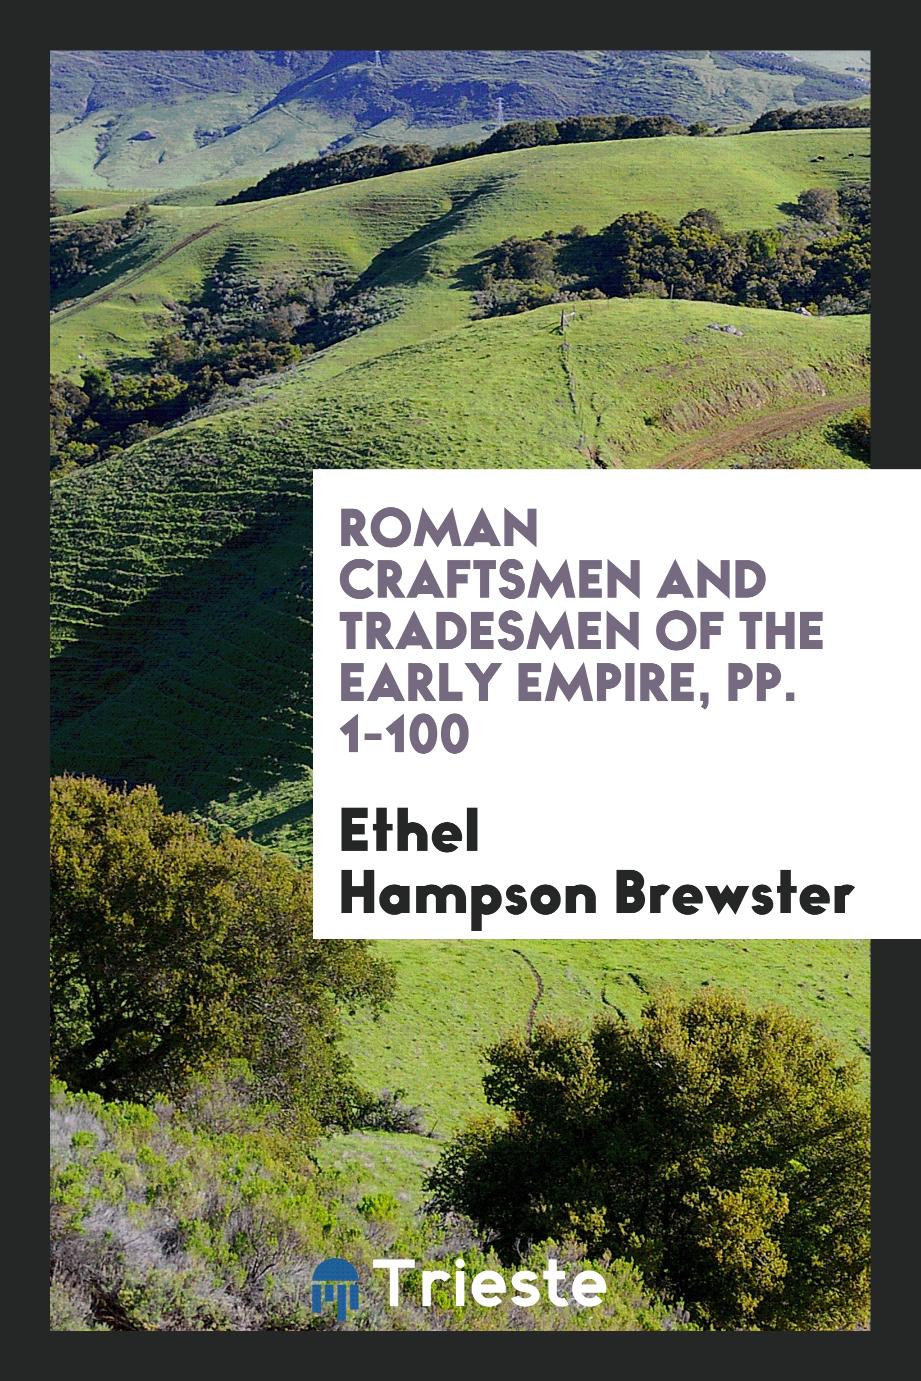 Roman Craftsmen and Tradesmen of the Early Empire, pp. 1-100